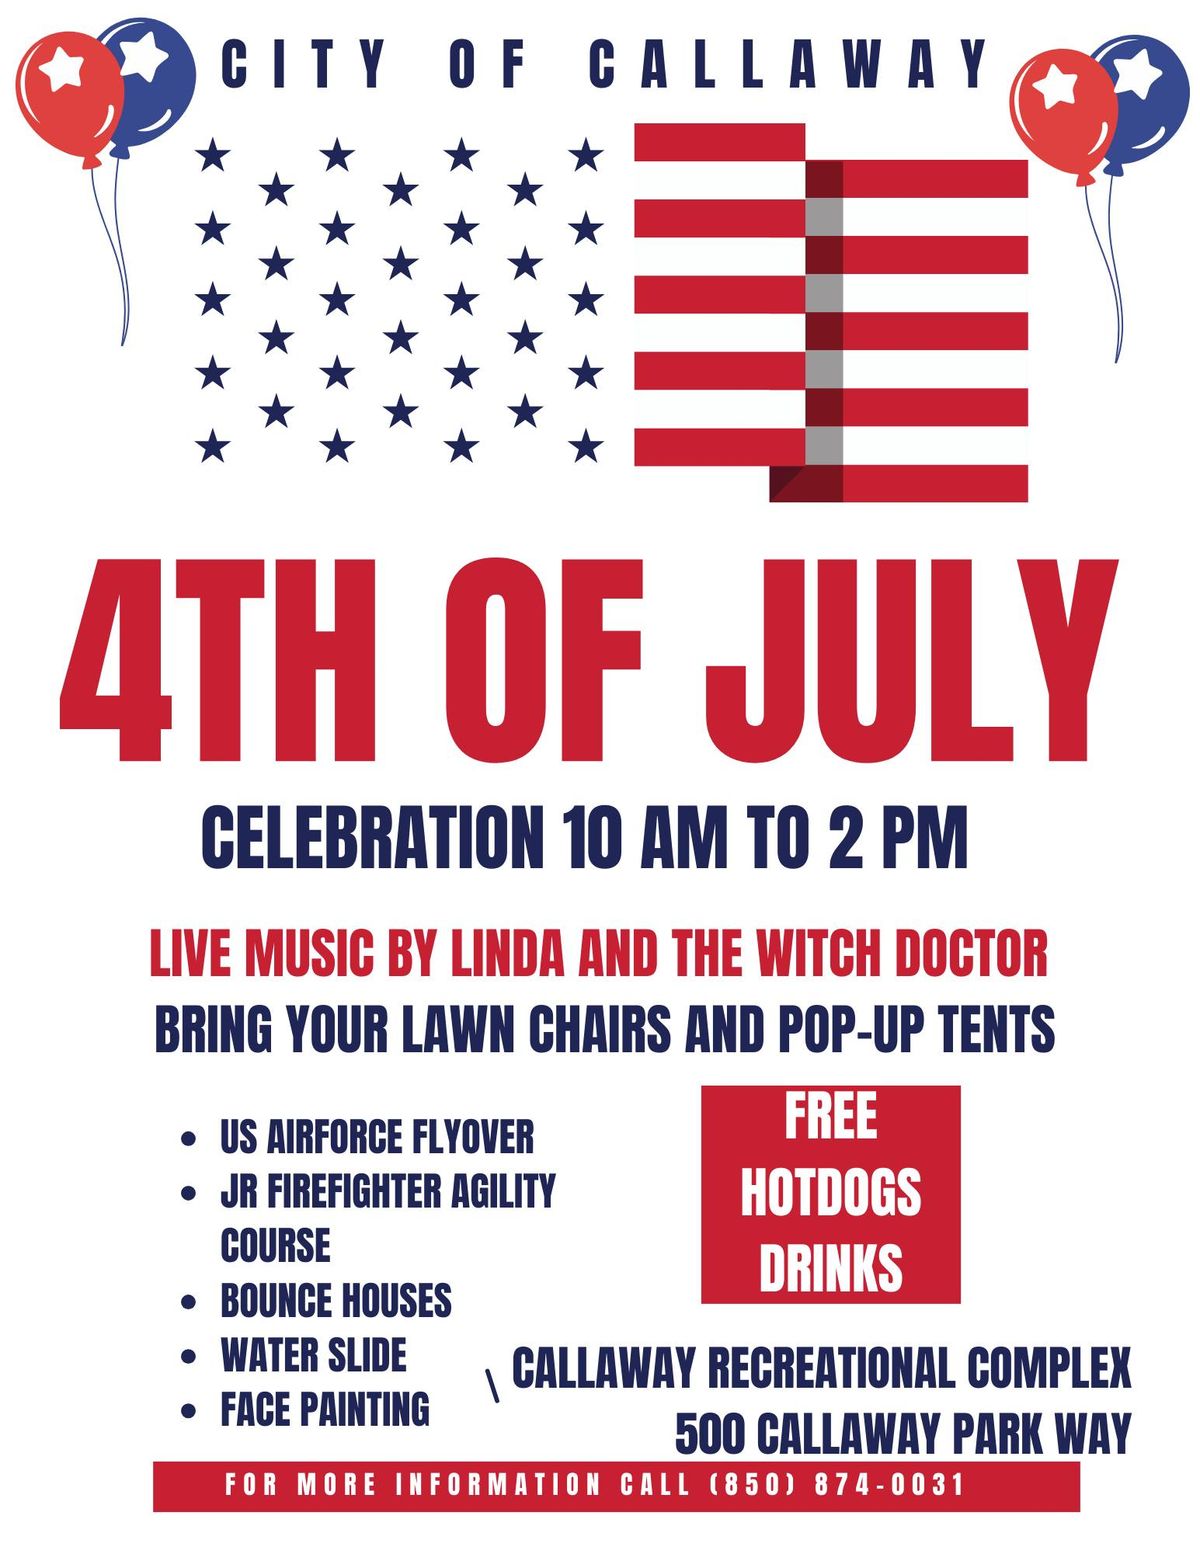 City of Callaway 4th of July Celebration!